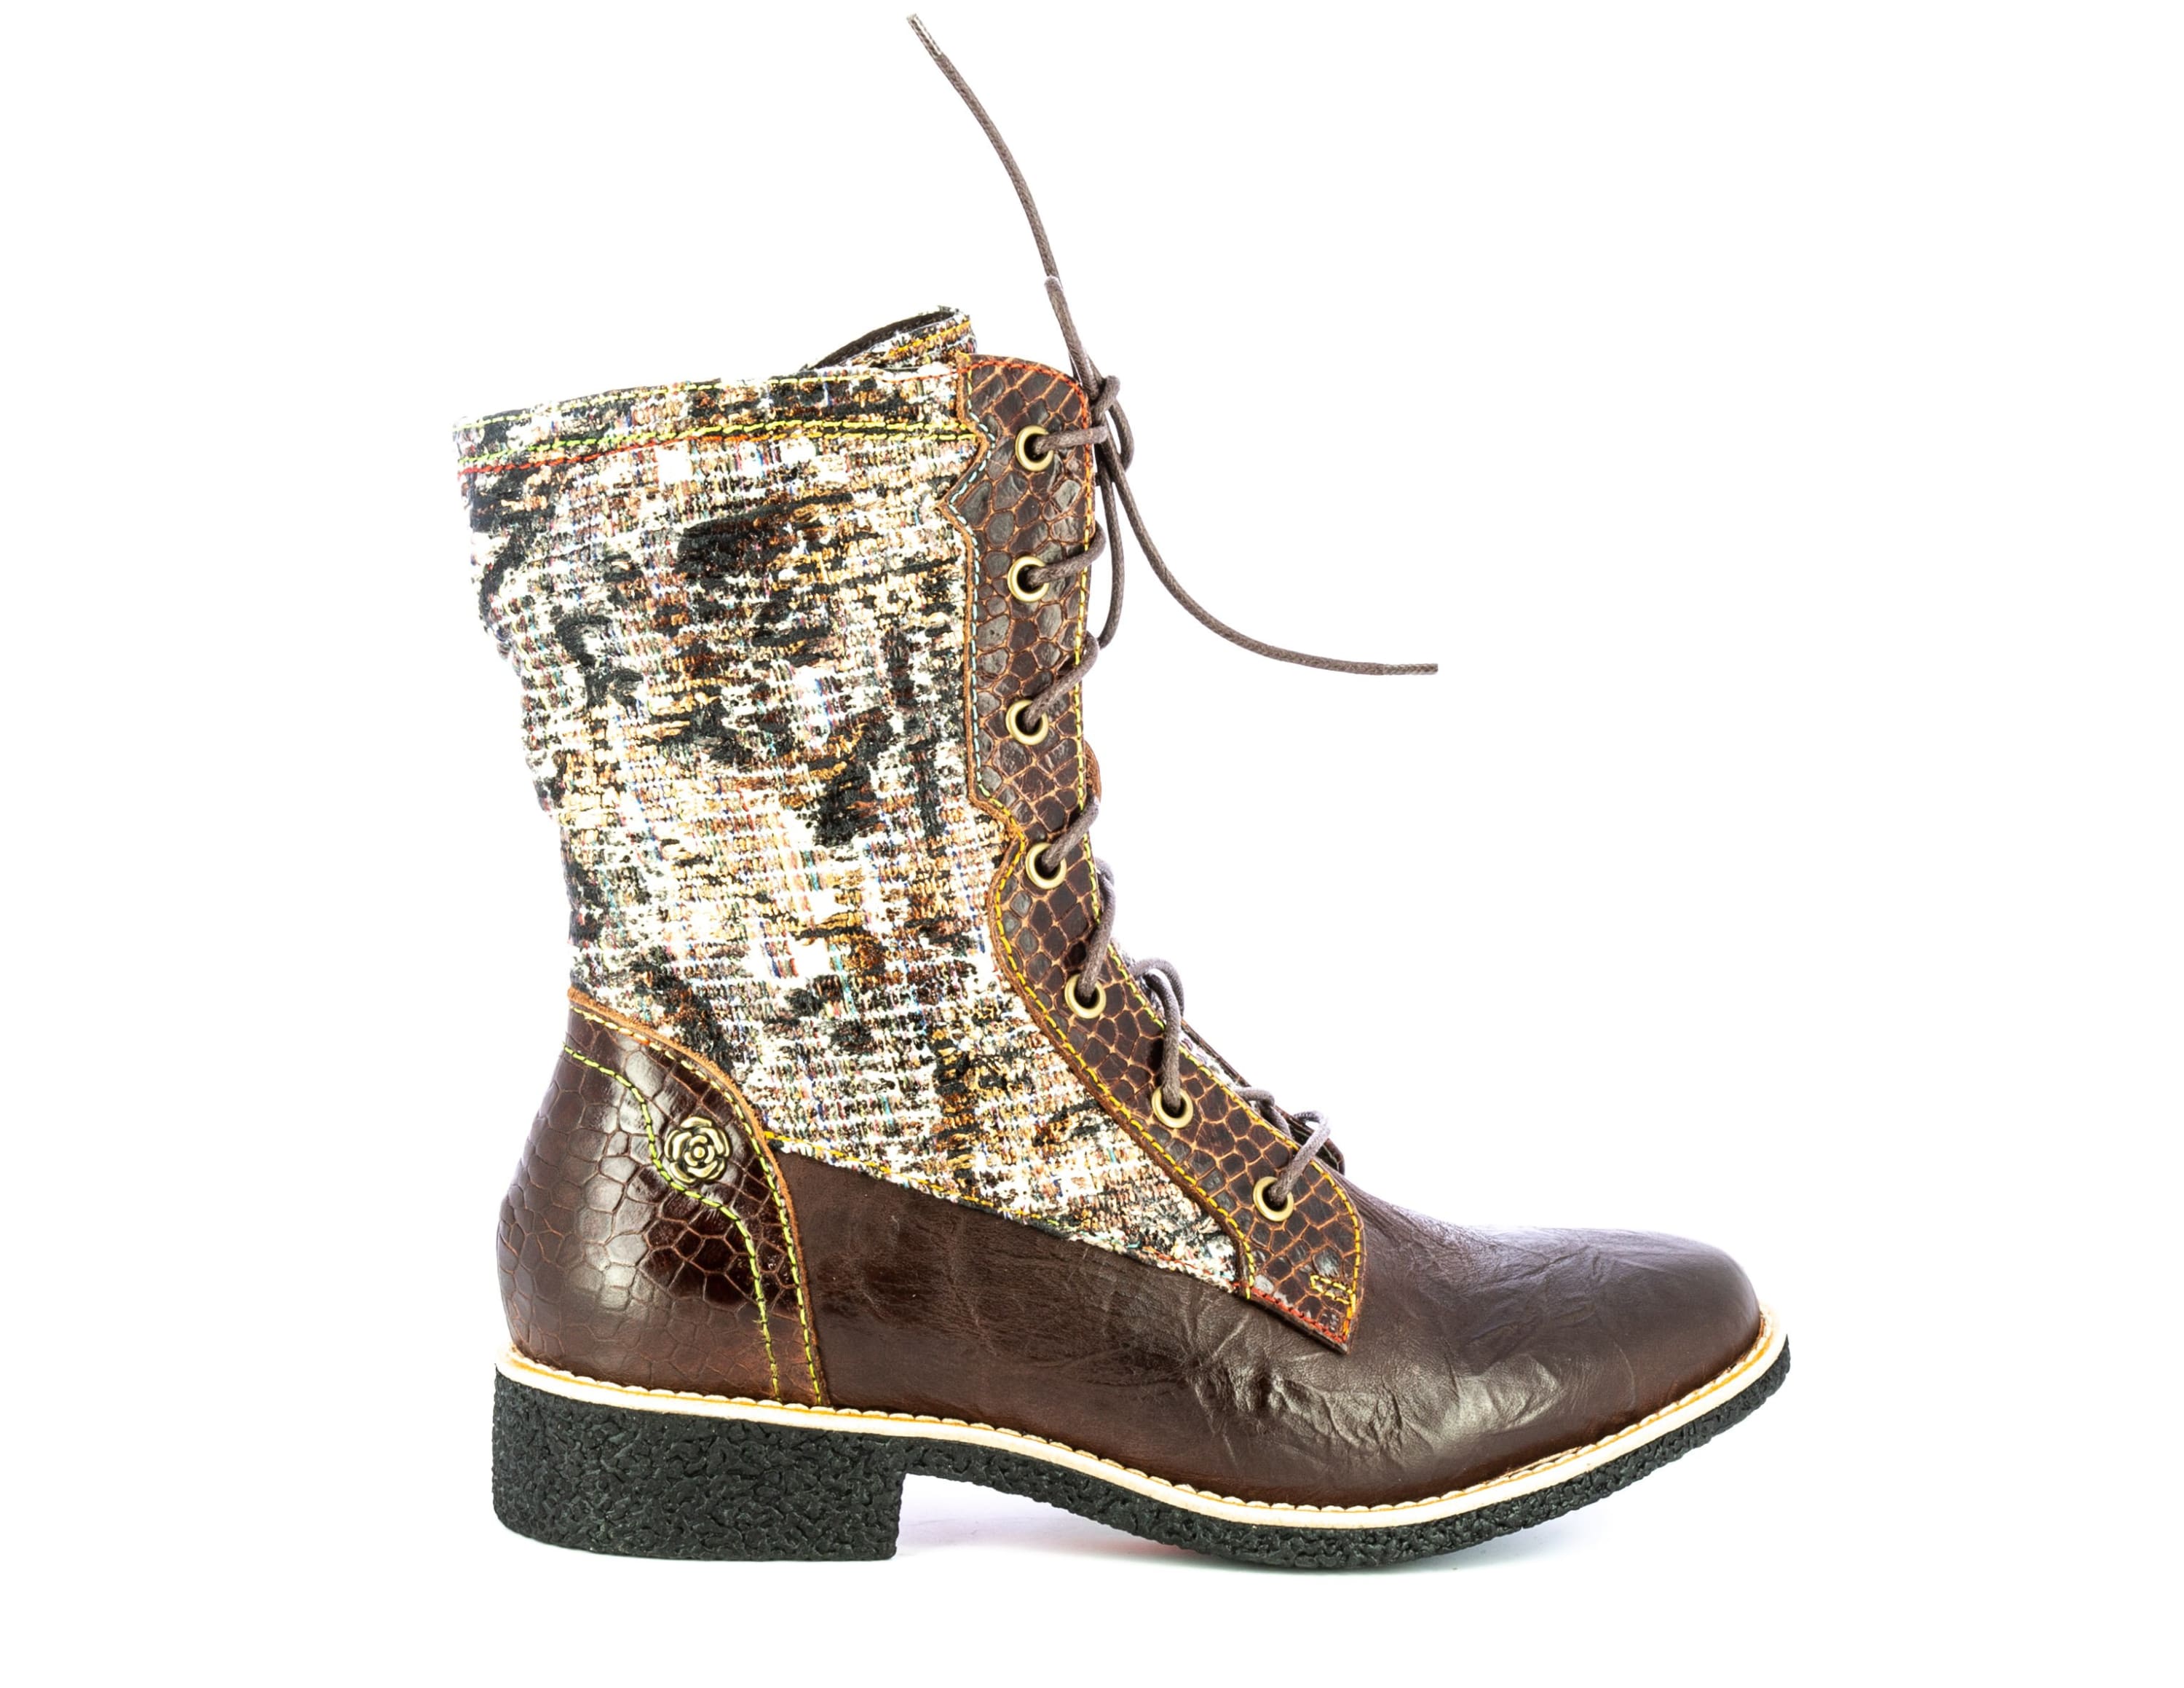 COCRALIEO 521 - 35 / Chocolate - Boots